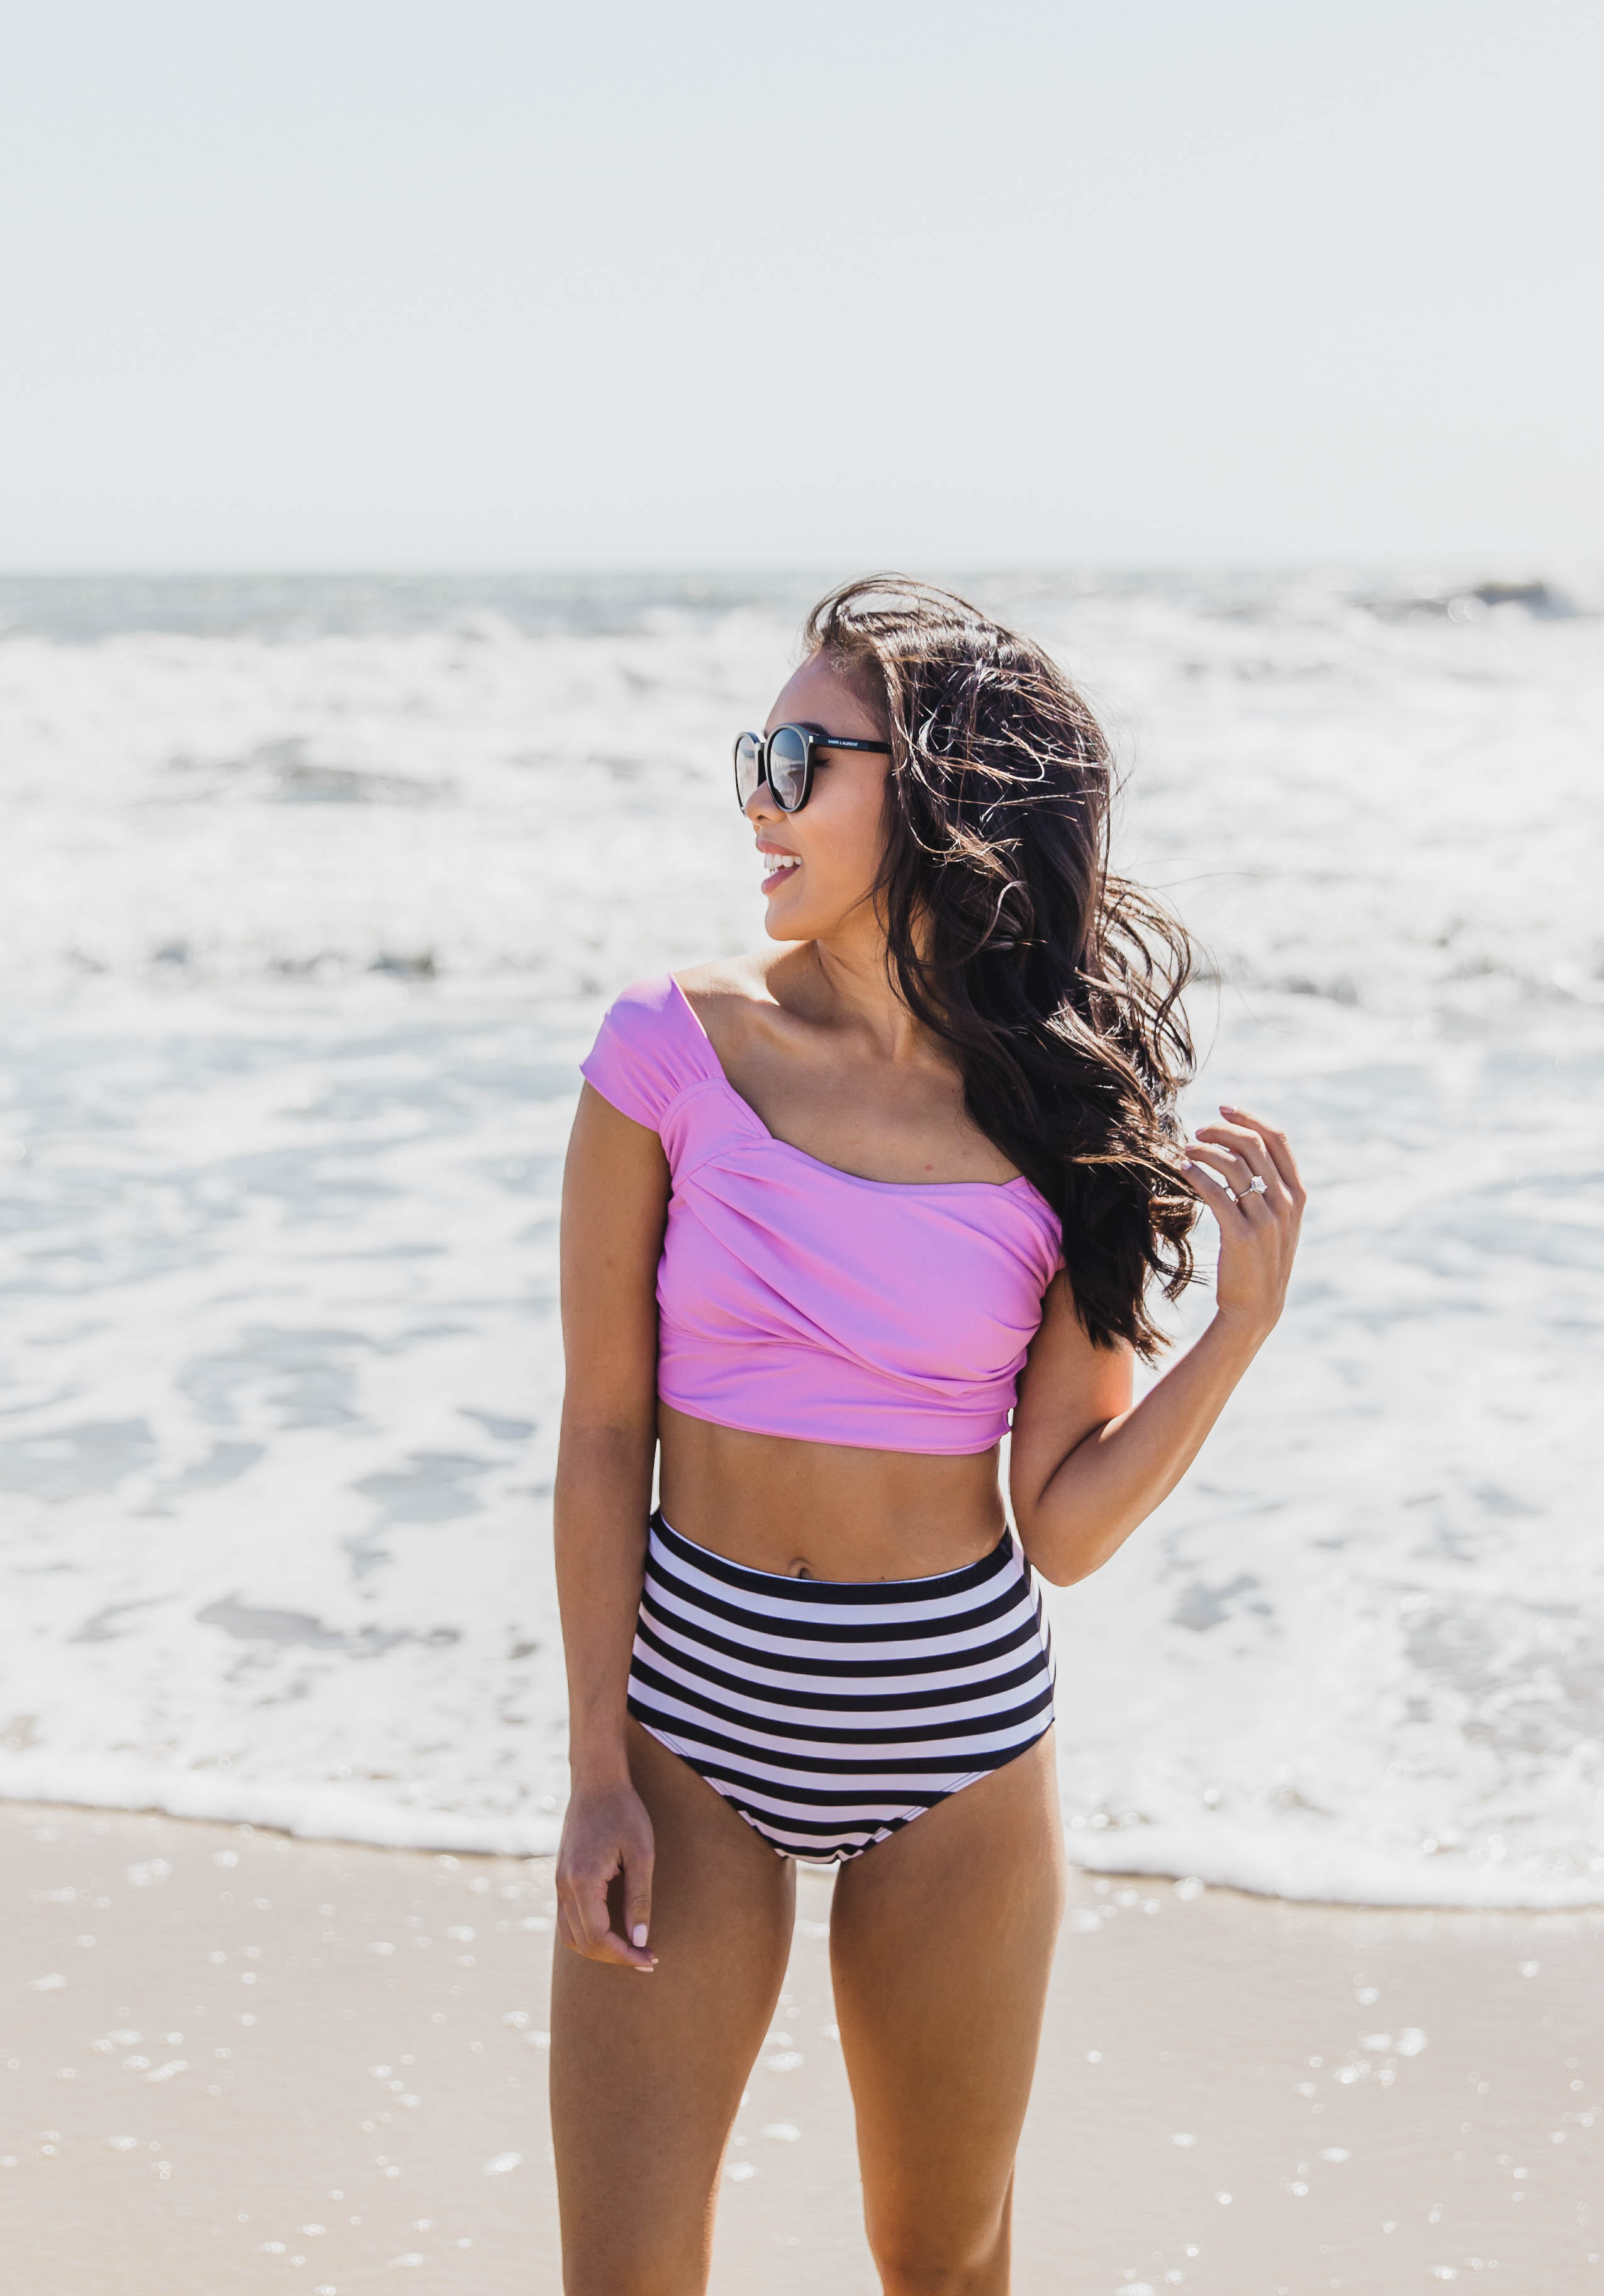 COLOR & CHIC | Orchid Swim Top + Striped High-Waisted Bottoms